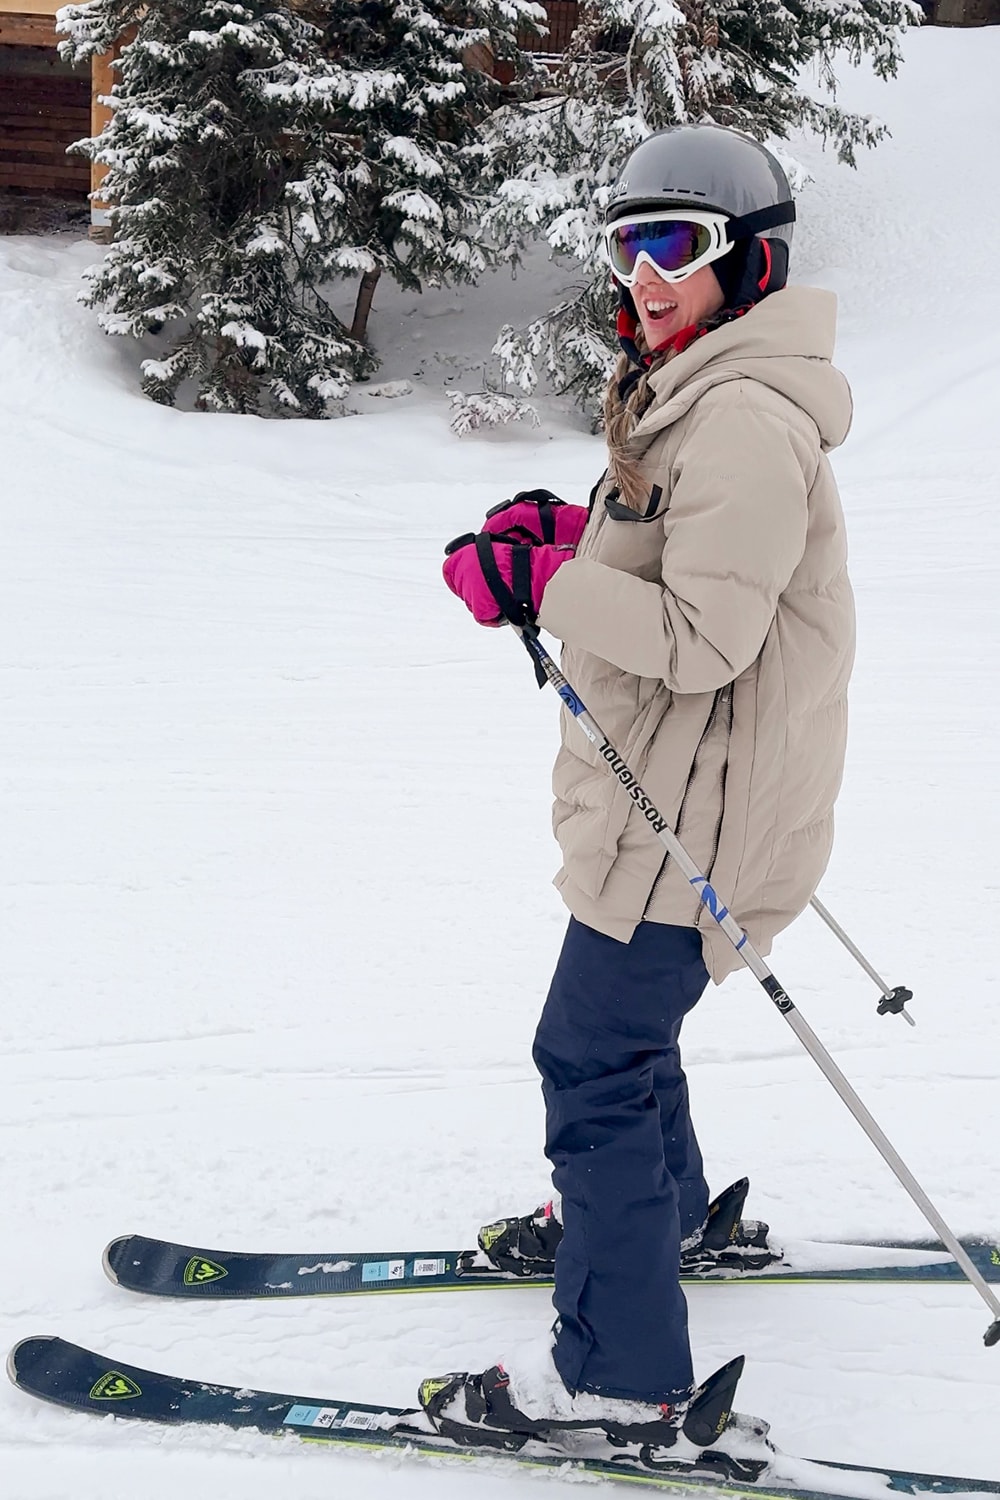 best place to ski in colorado for beginners - Steamboat Ski Resort ski lessons